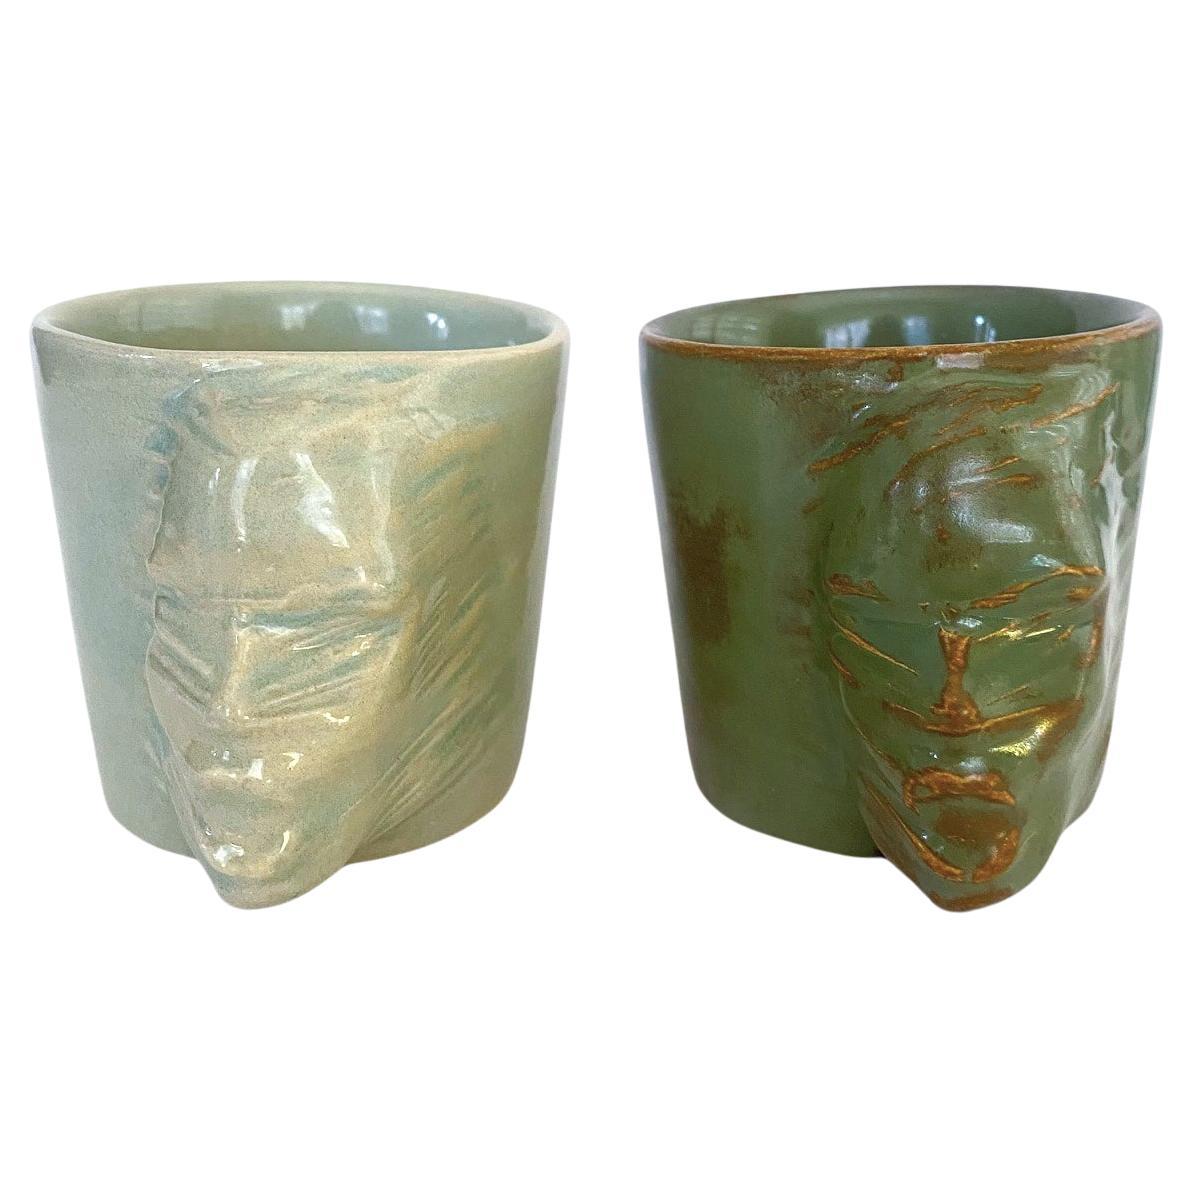 Sculptural Ceramic Cups Set of 2 by Hulya Sozer, Face Silhouette, Earthly Greene